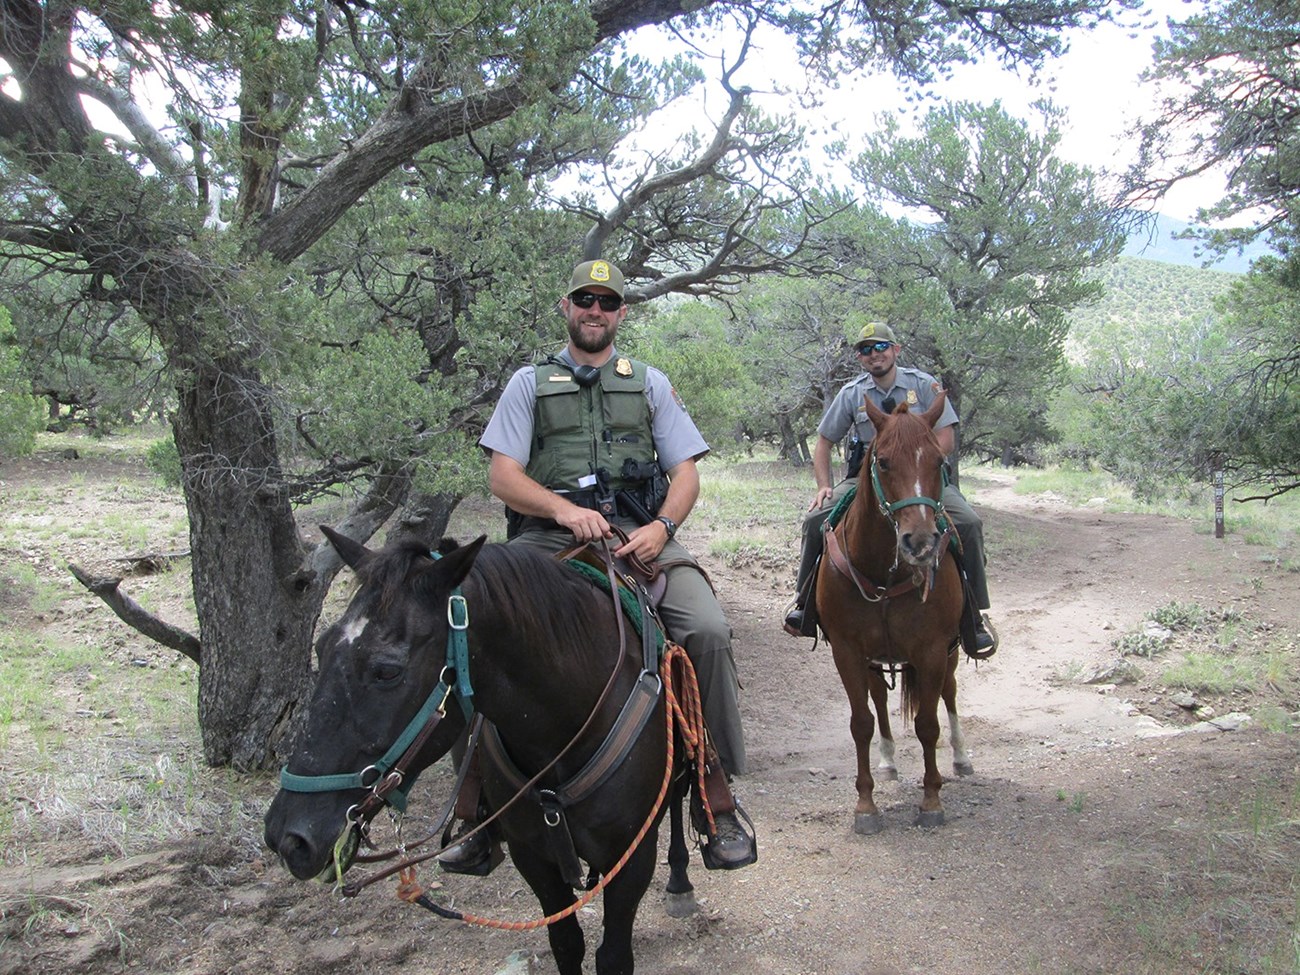 Two park rangers ride horses in the National Preserve